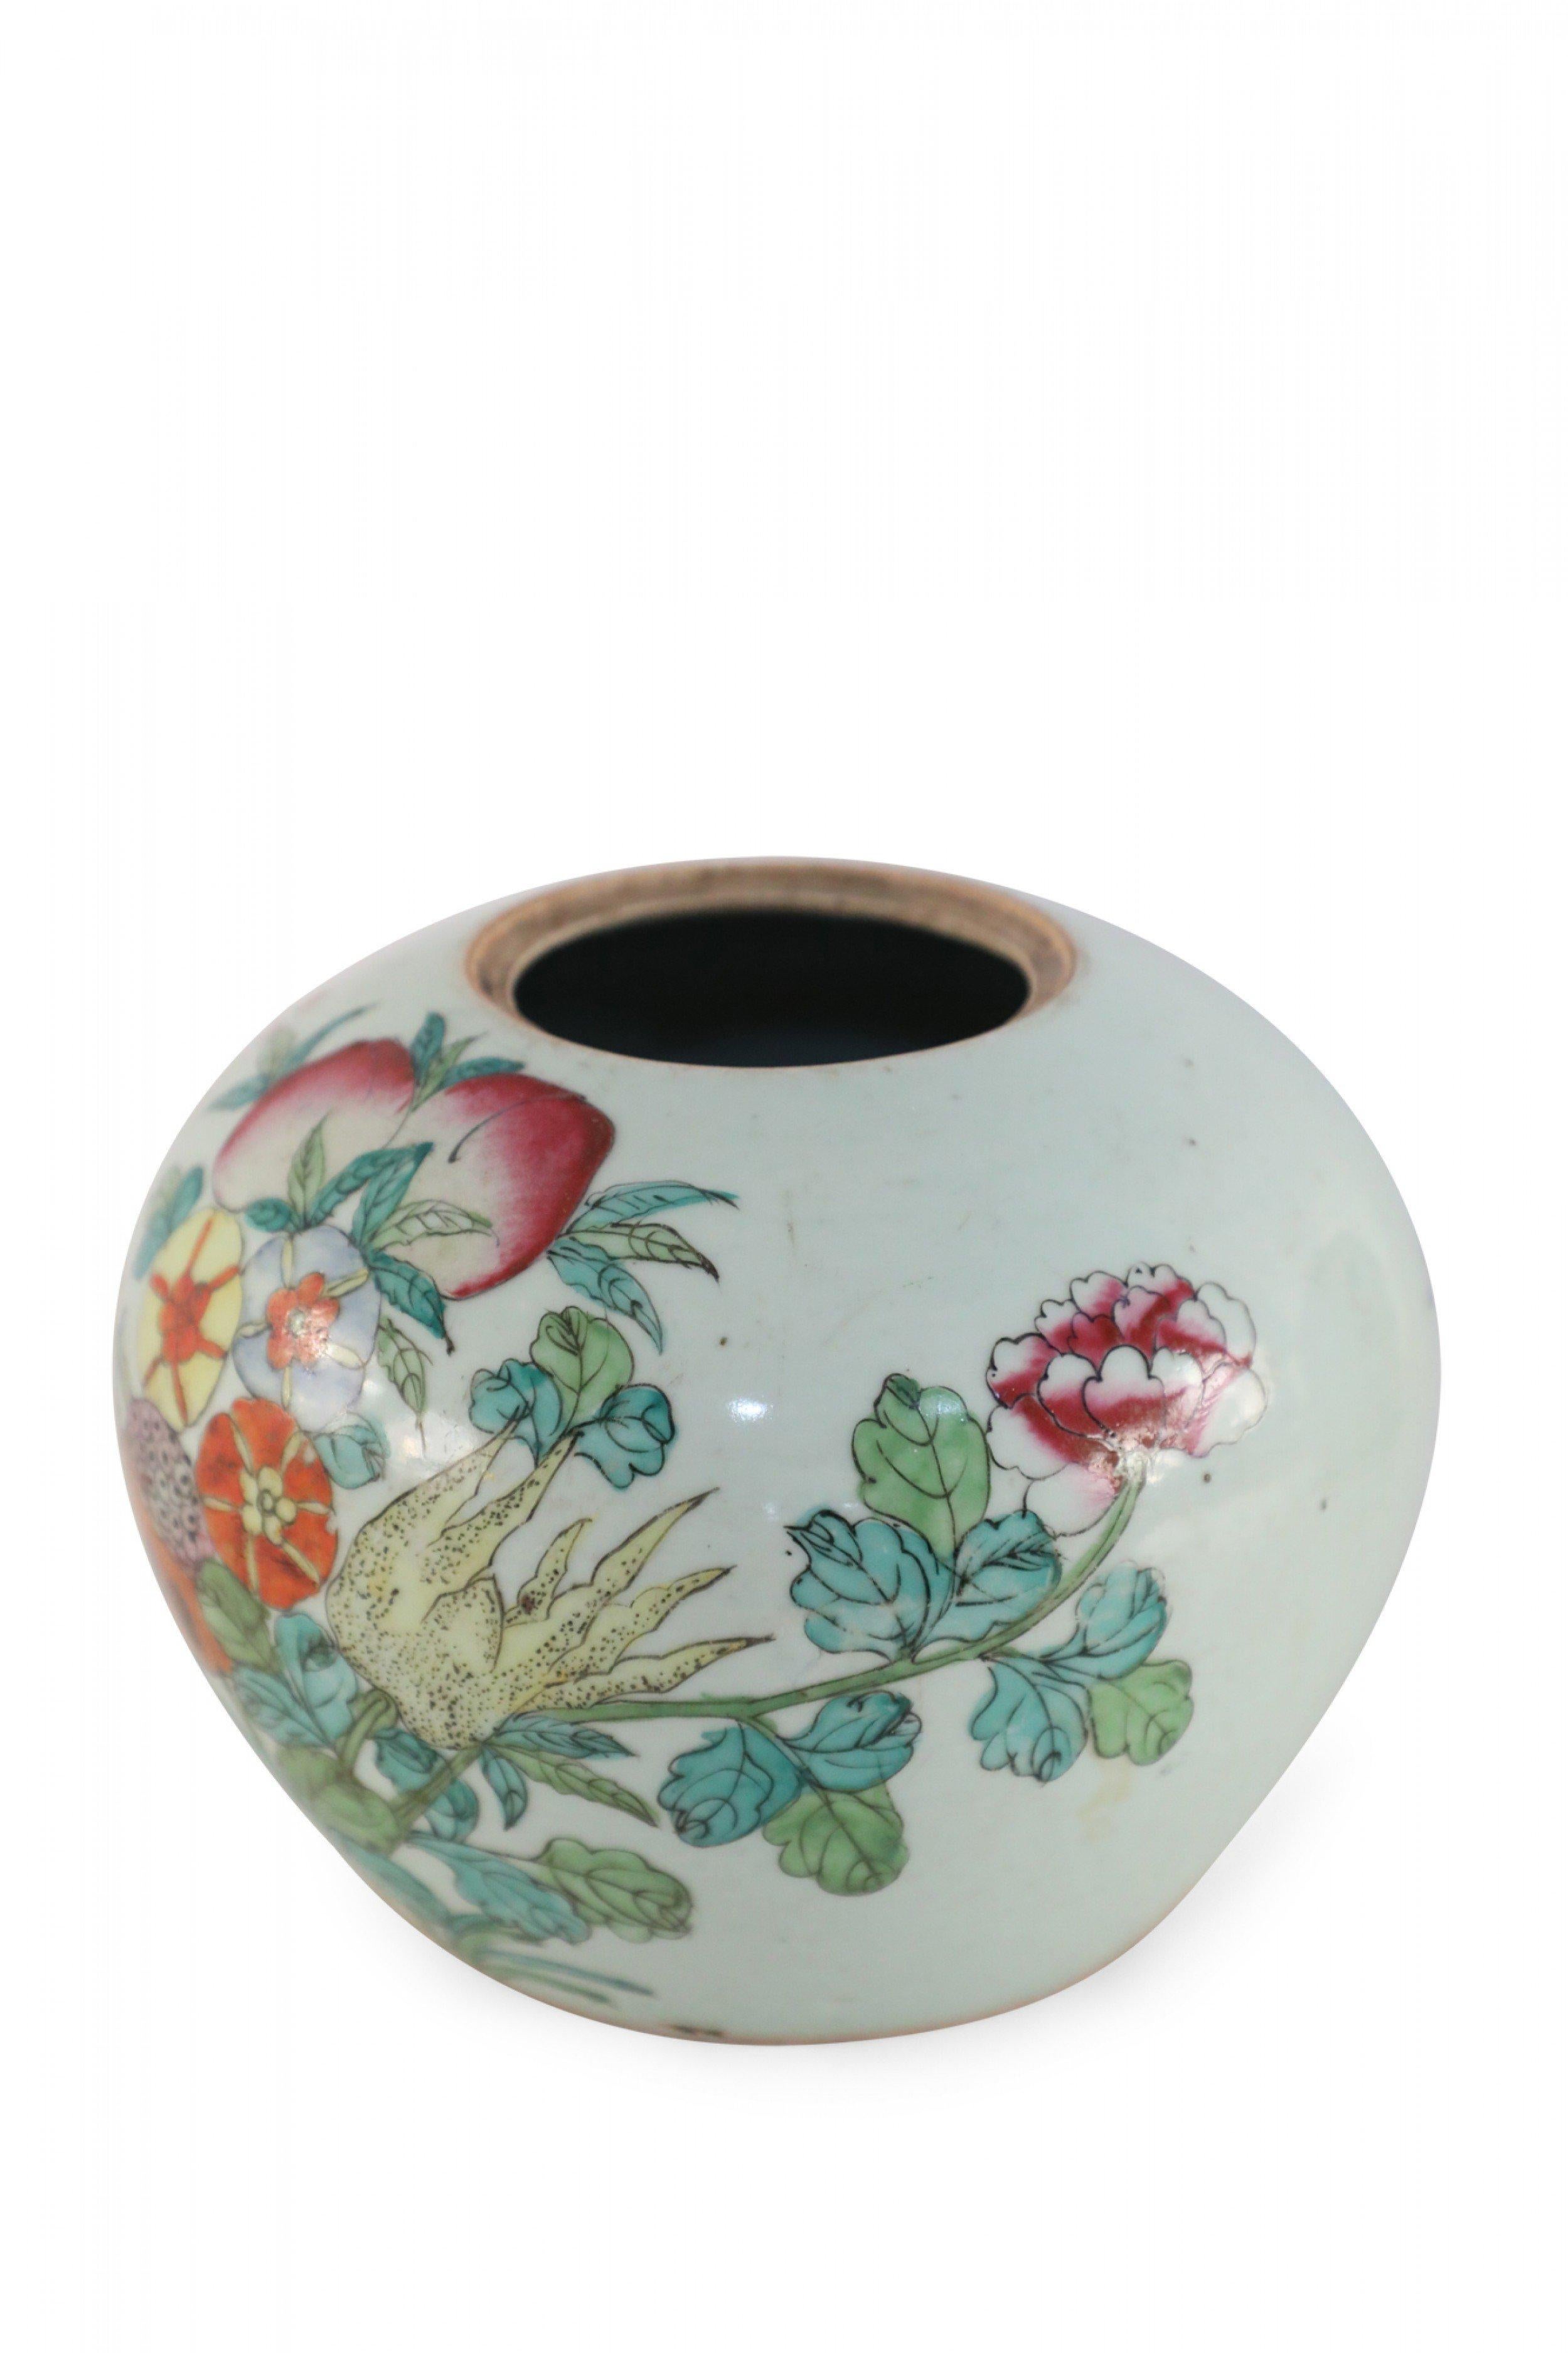 20th Century Chinese White and Floral Rounded Porcelain Watermelon Jar For Sale